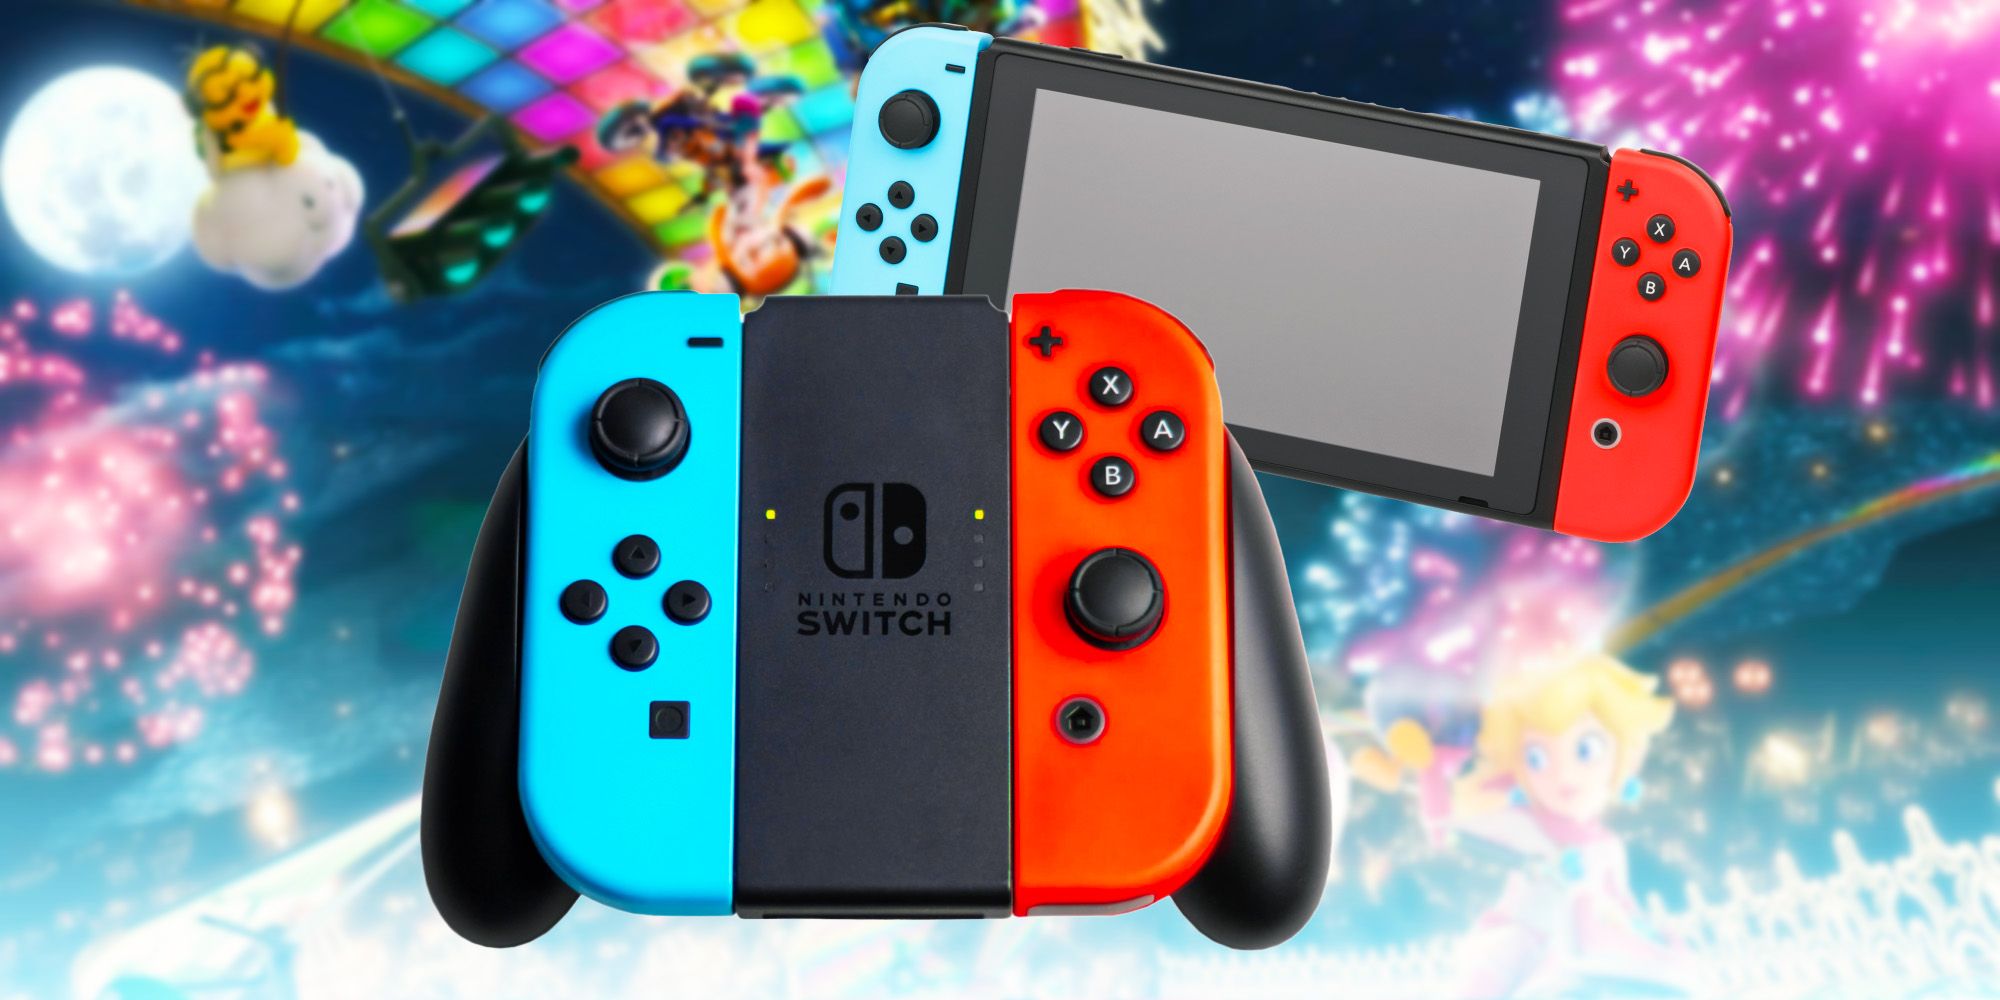 Latest Nintendo Switch 2 Rumors May Be Bad News For The Console